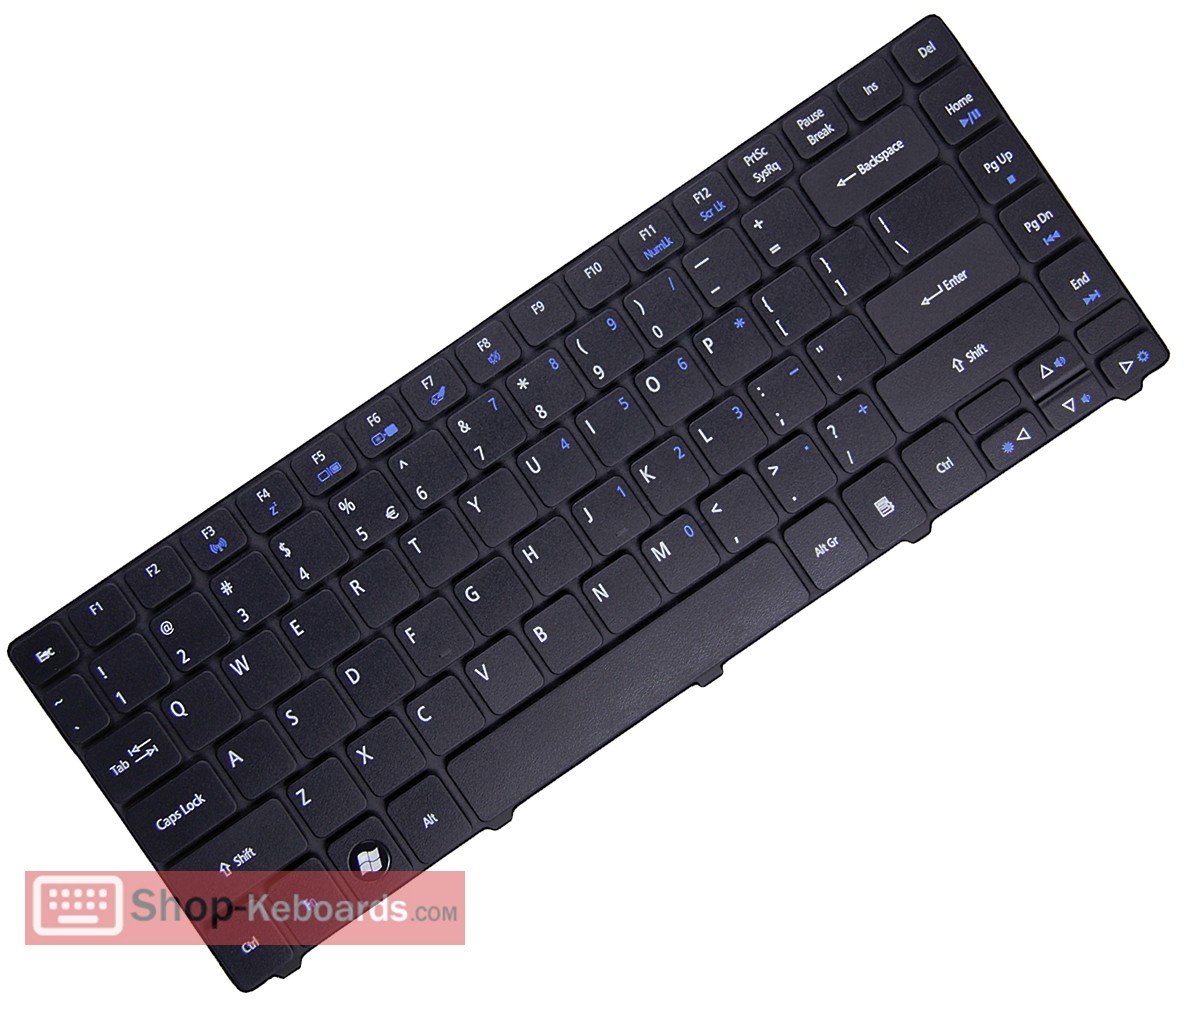 Acer Aspire 3820TG-484G50nks Keyboard replacement